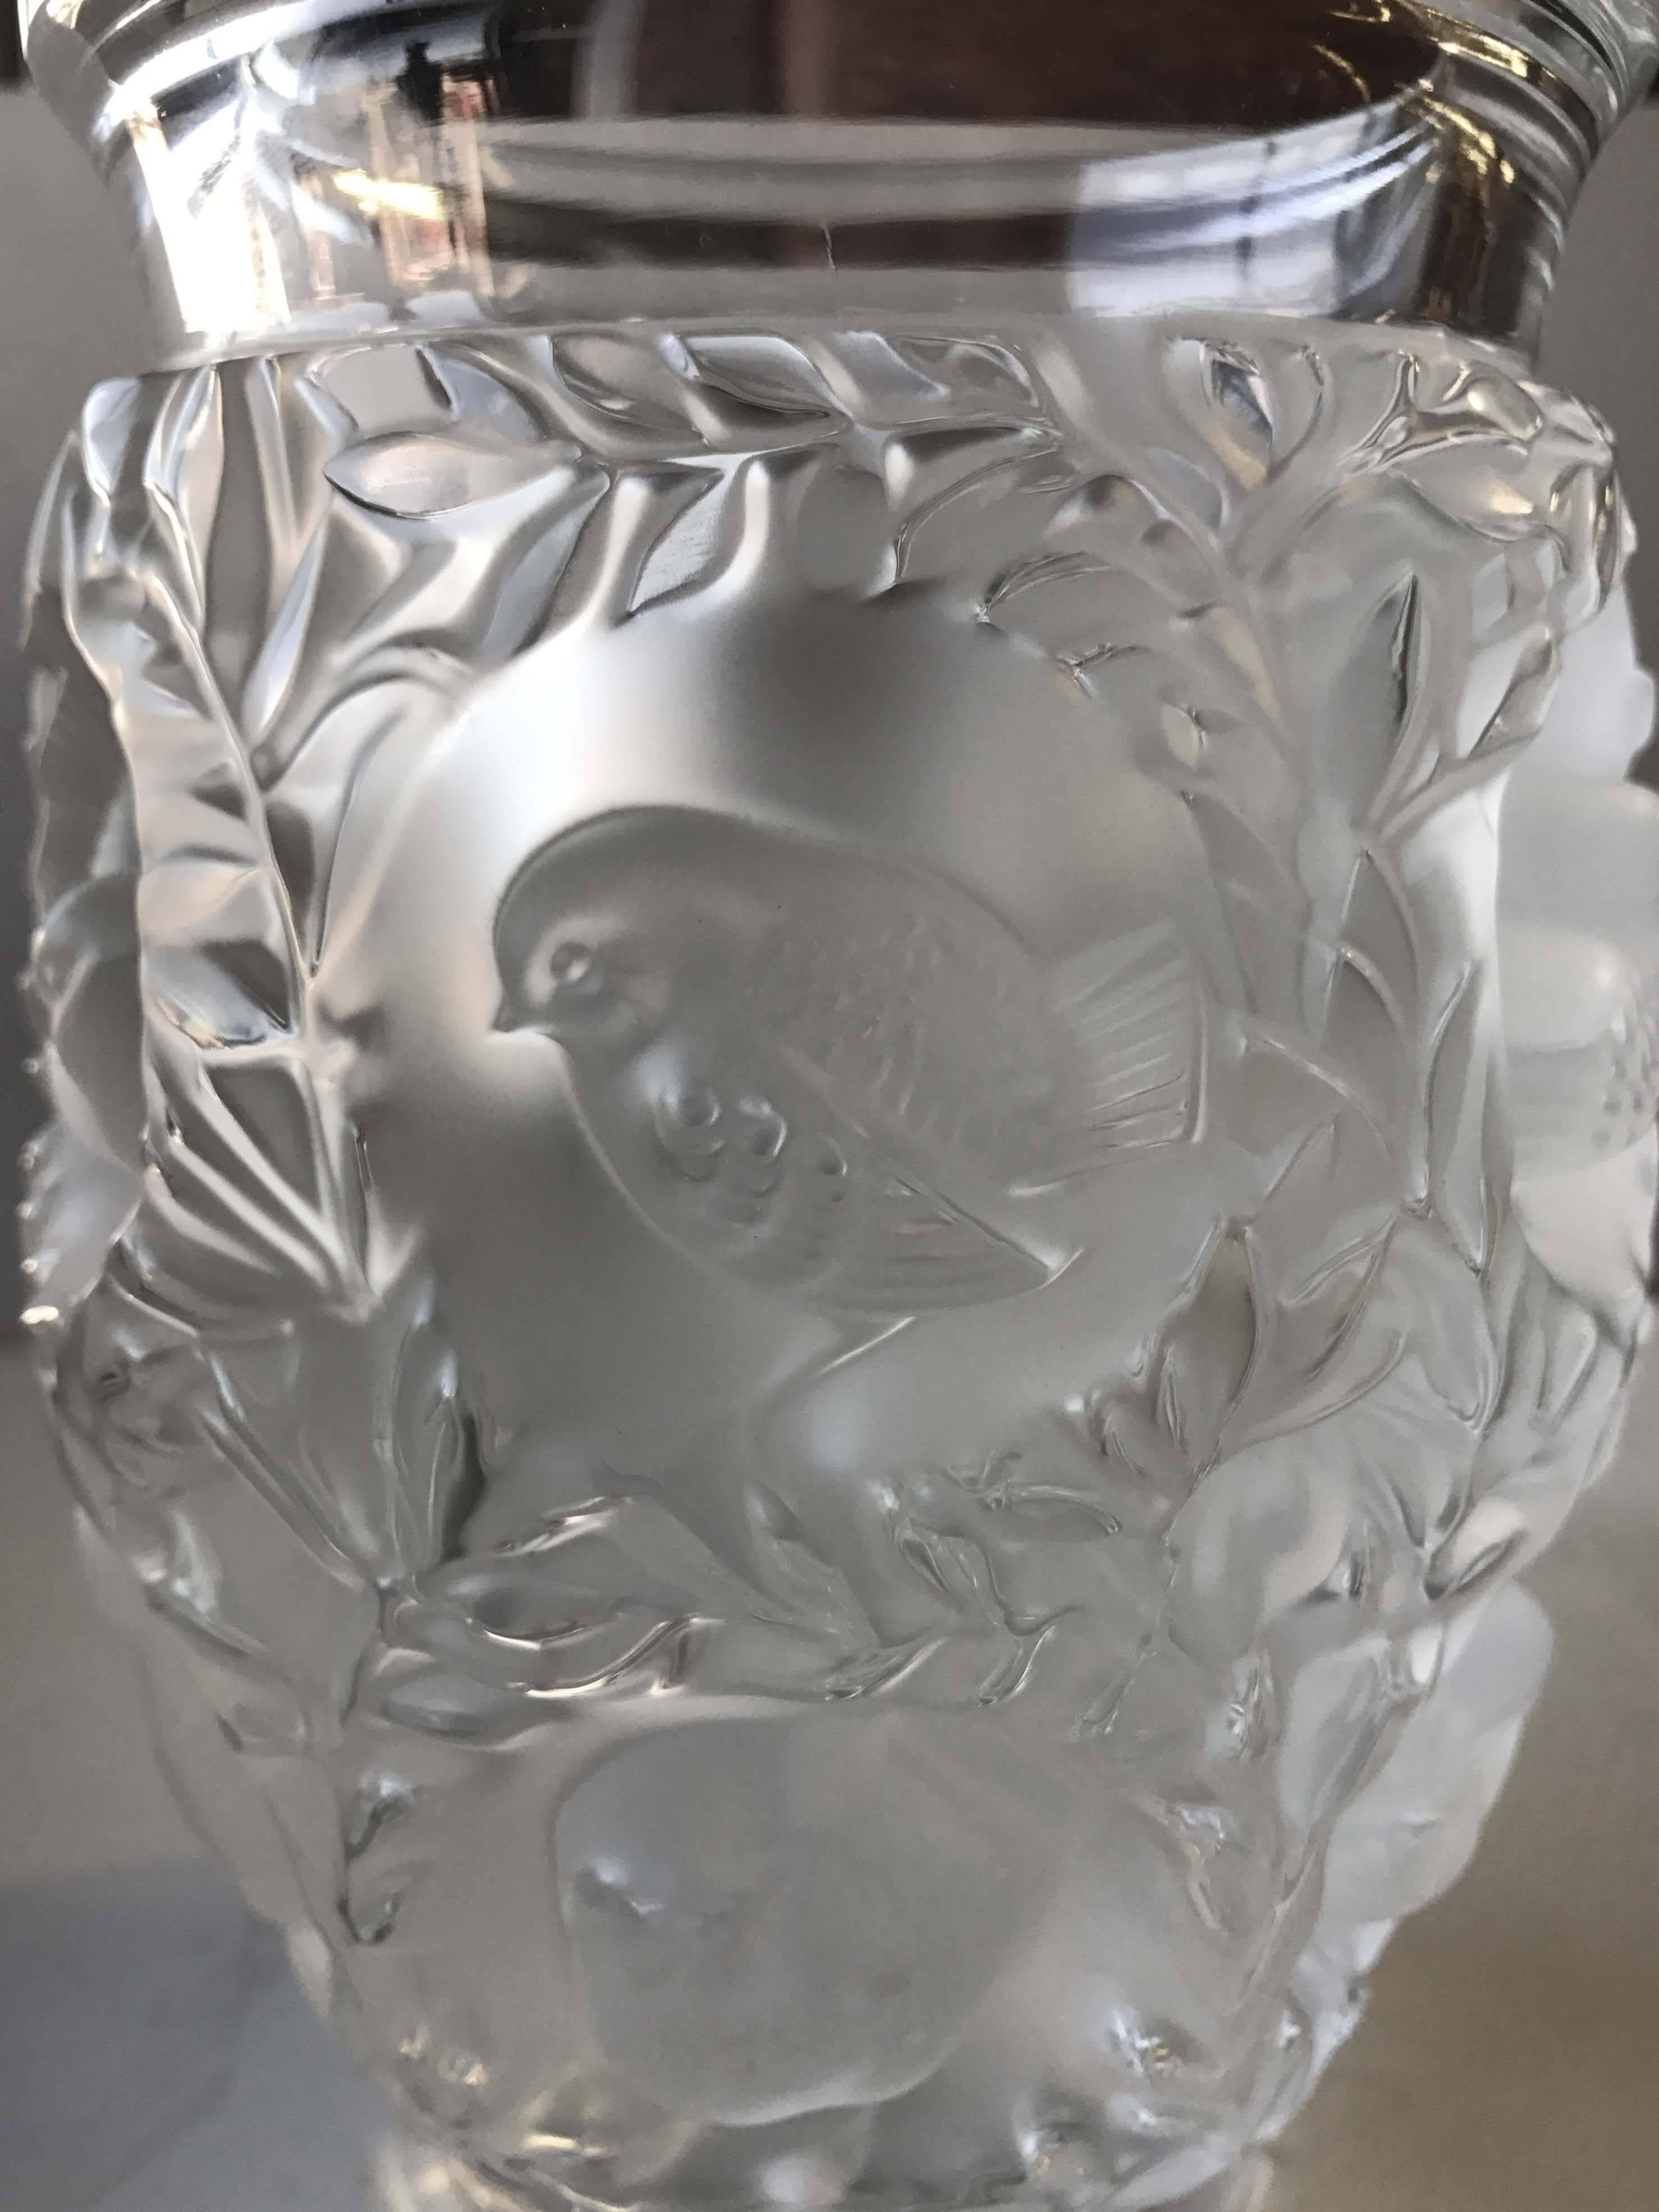 Beautiful vase made in the "Saint Francois" pattern by René Lalique, circa 1930. This gorgeous vase has a flared rim on a tapering cylindrical body of frosted glass and it is relief-decorated with birds, leaves and vines. This pattern